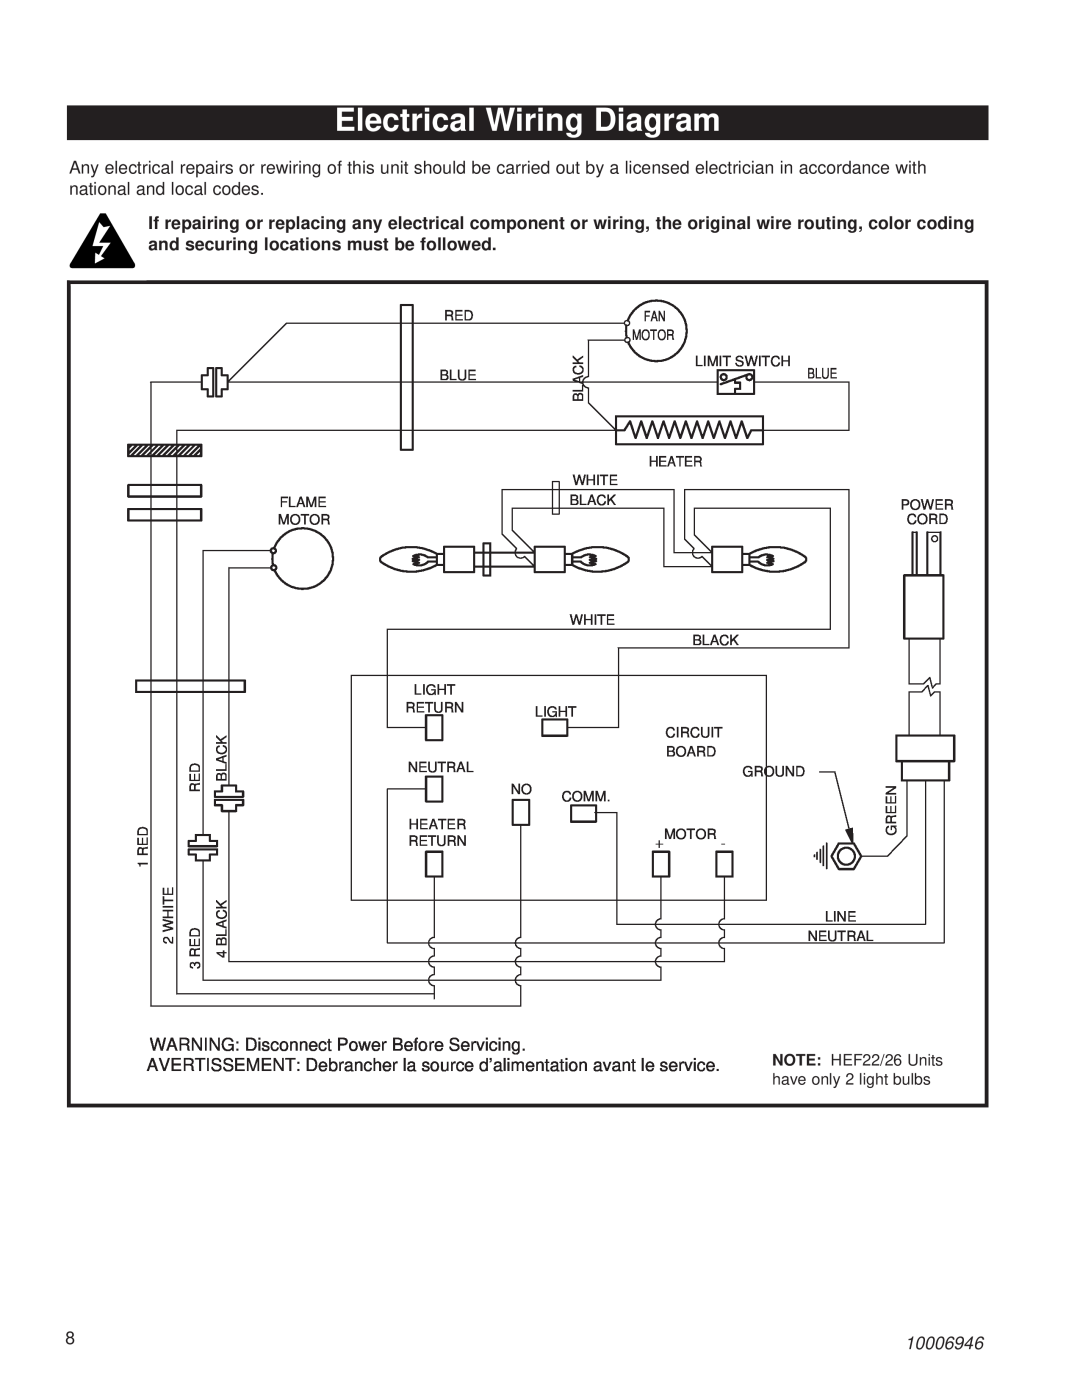 Vermont Casting HEF26, HEF36, HEF33 Electrical Wiring Diagram, WARNING Disconnect Power Before Servicing, 10006946 